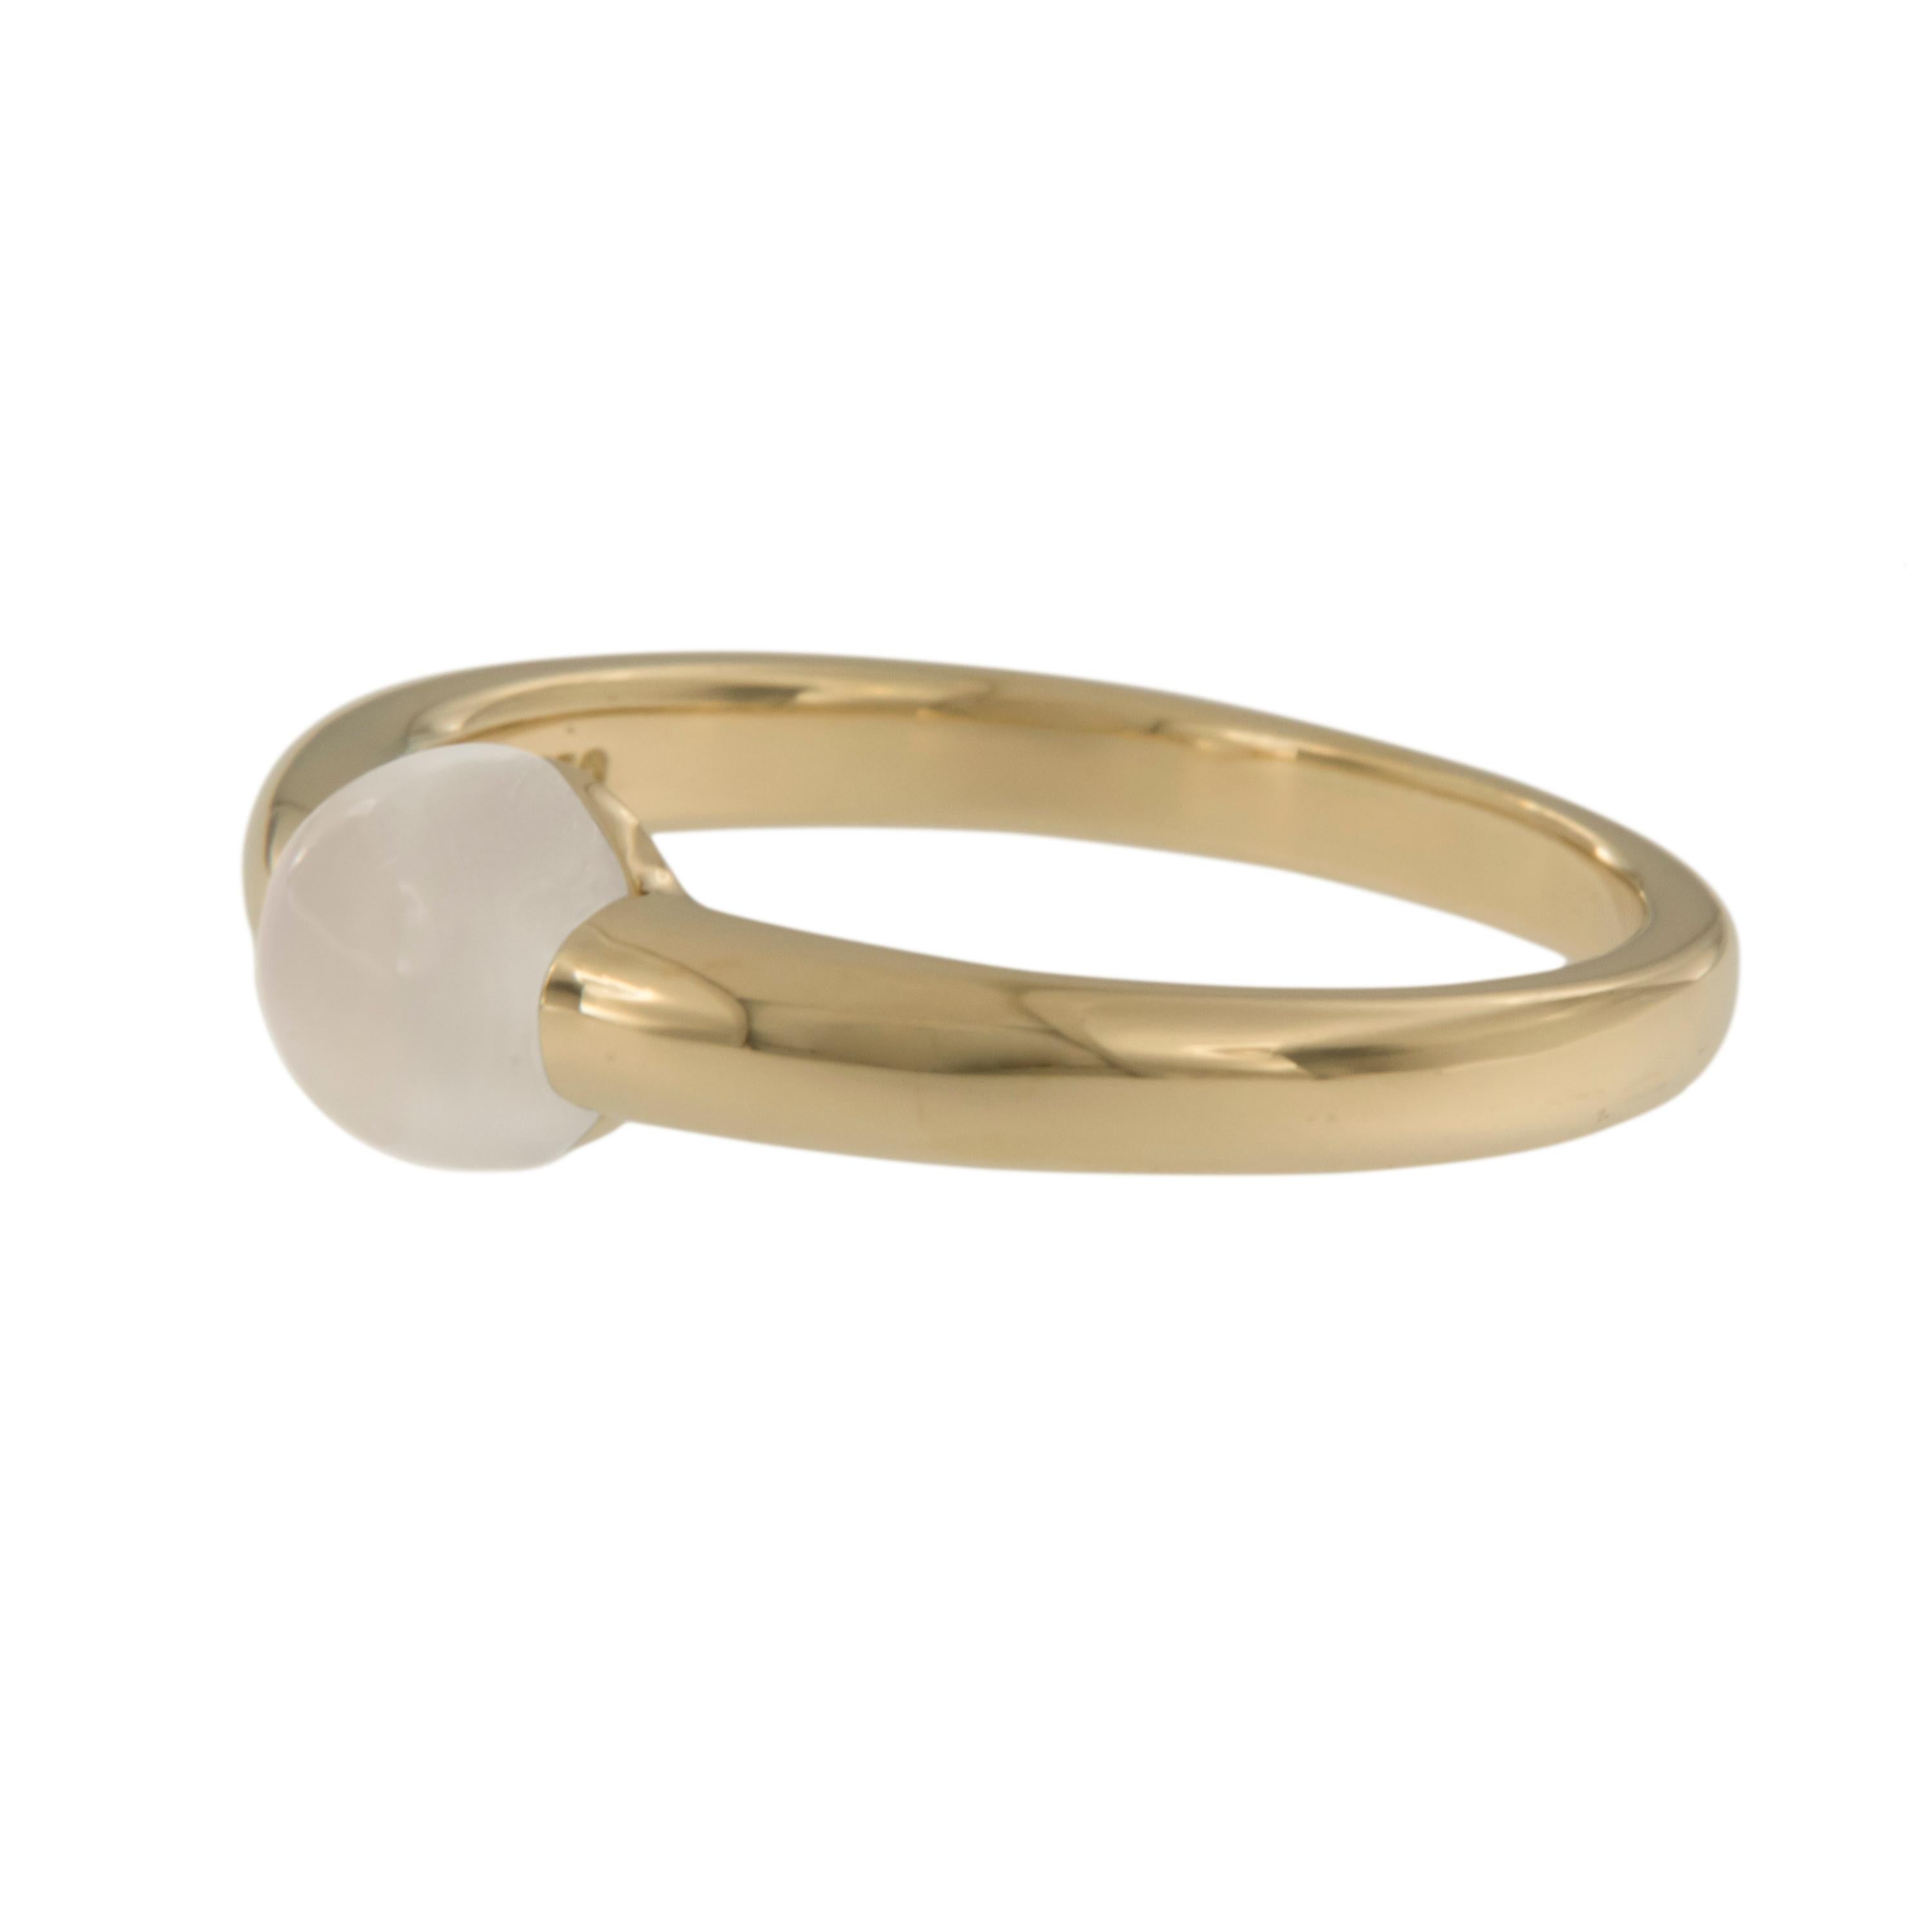 This adorable right hand ring will look perfect on your hand with trending cabochon cut moonstone that has magical shifting blue color. Sleek and classic in design, this size 6.5 is the ring for you. Complimentary signature wrapping & presentation